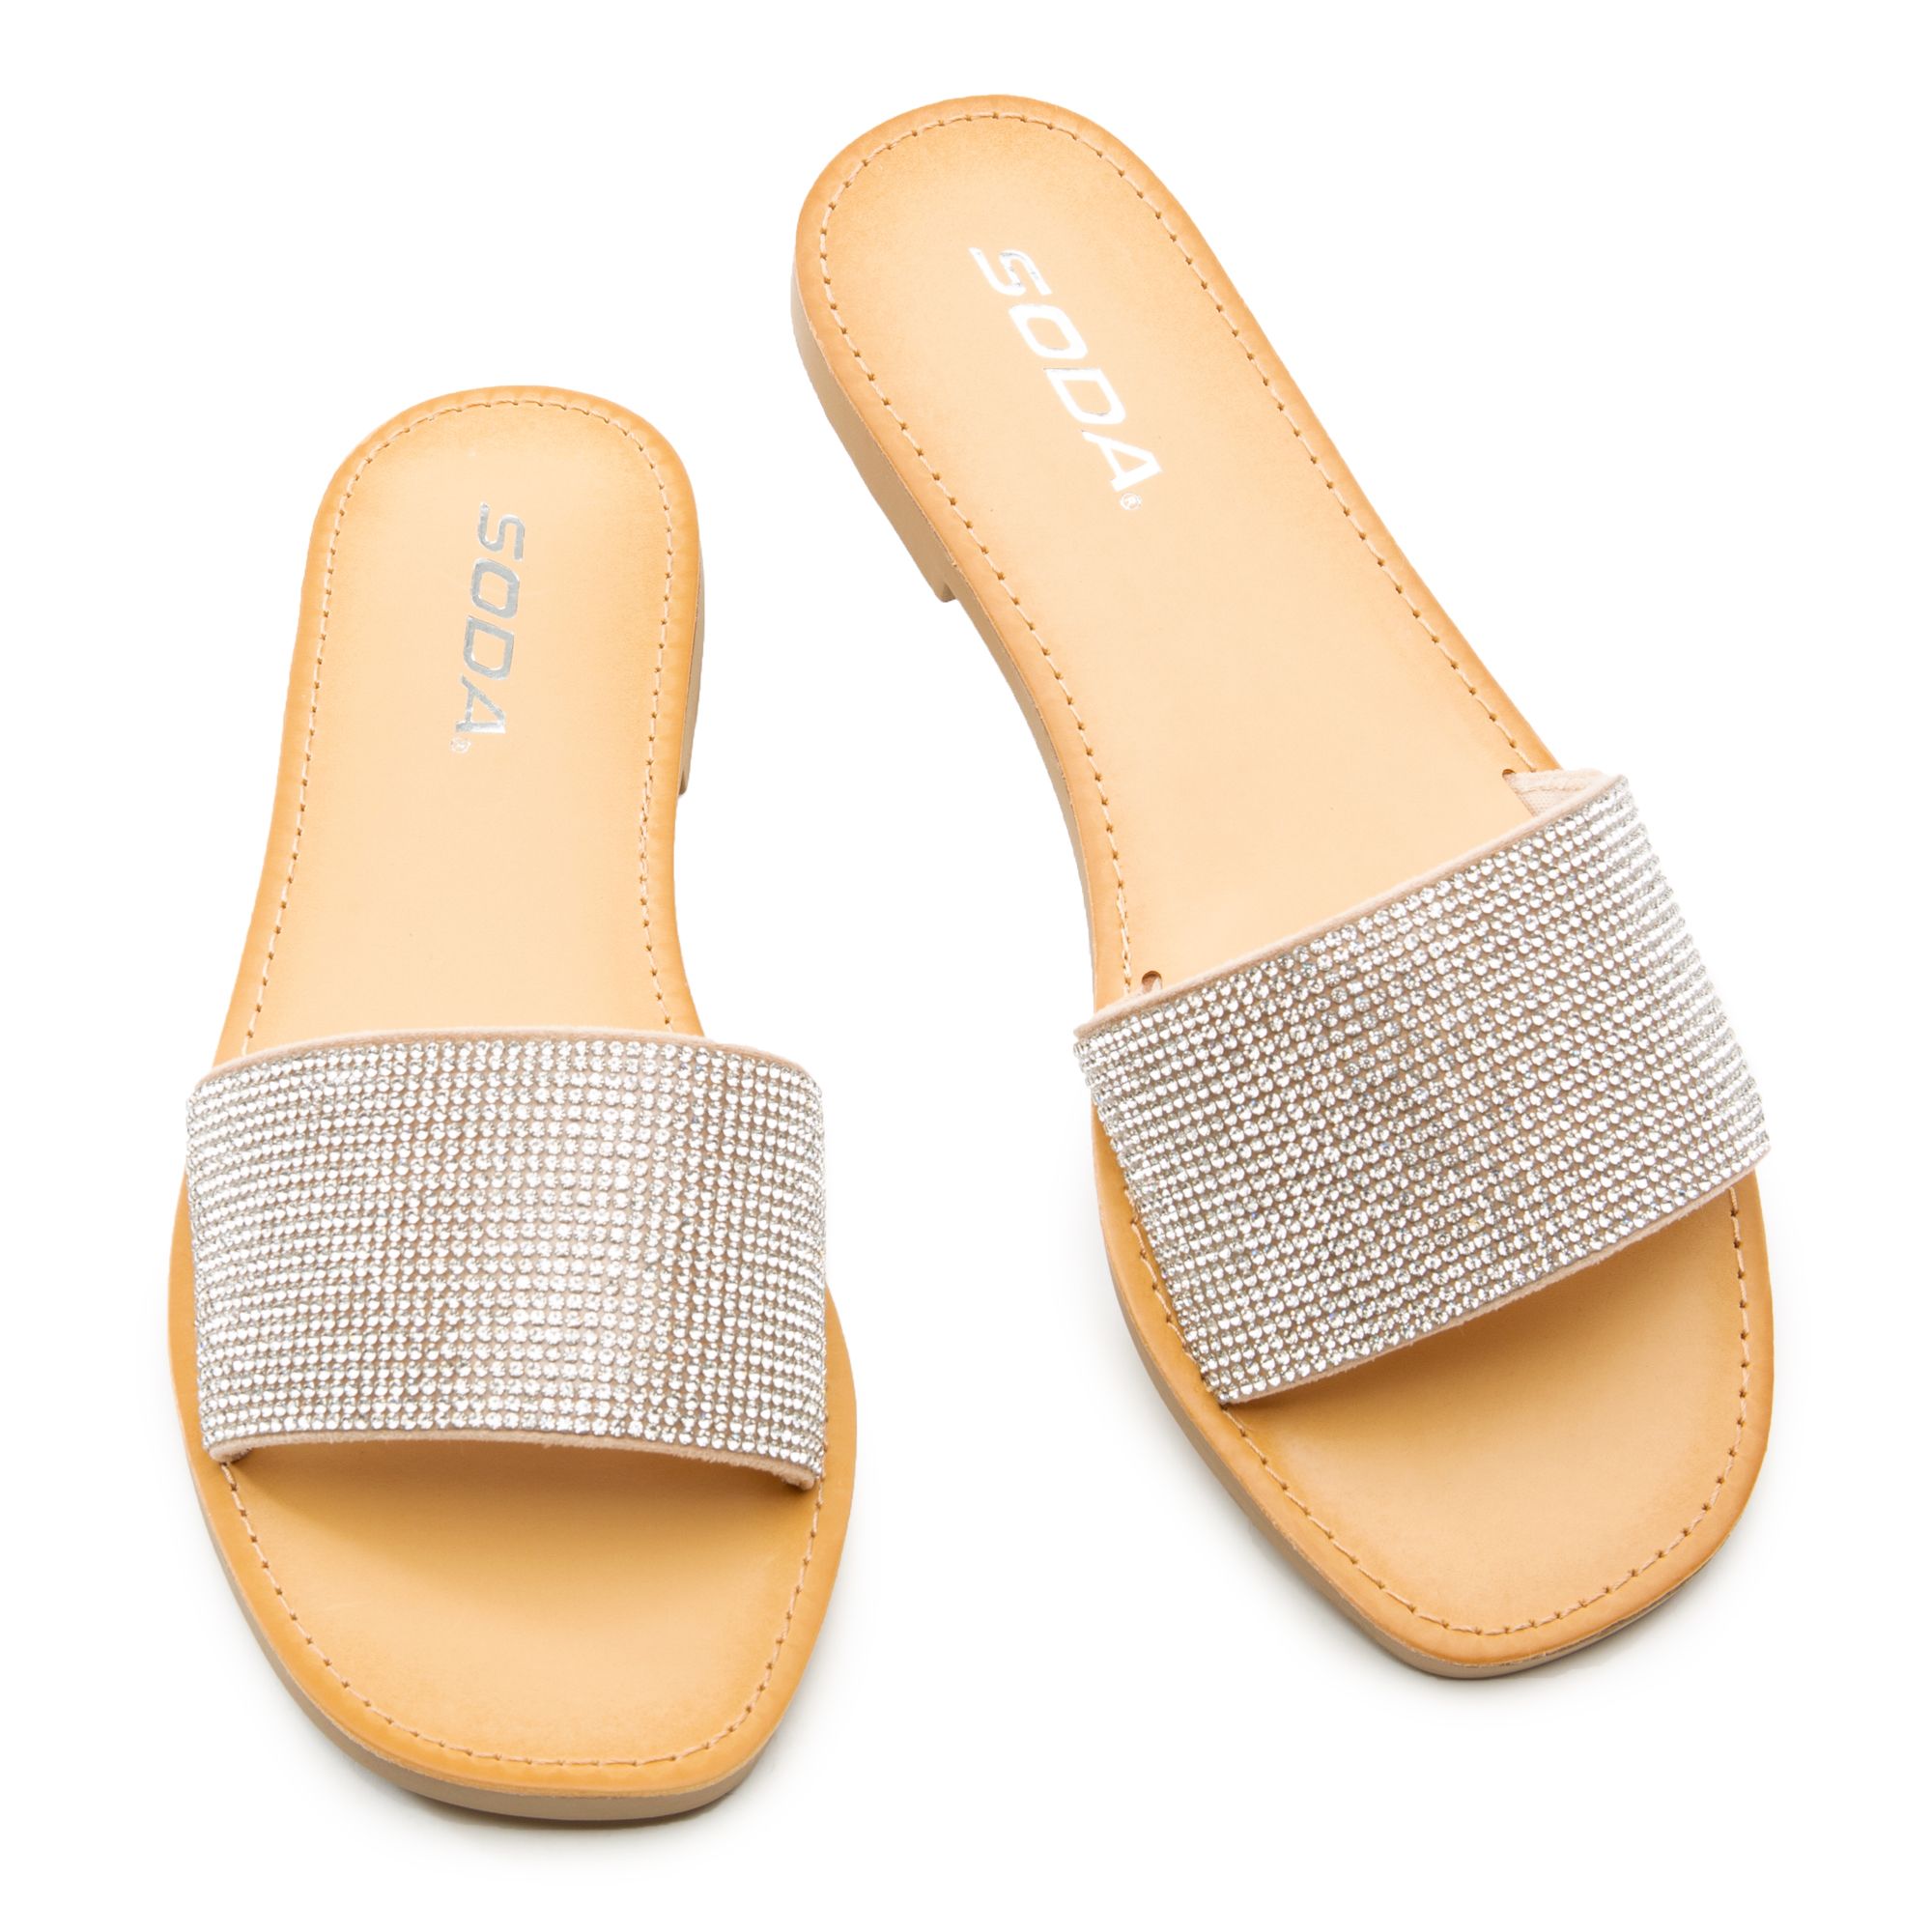 JUSTICE-S FLAT SANDALS FD JUSTICE-S SLV STONE